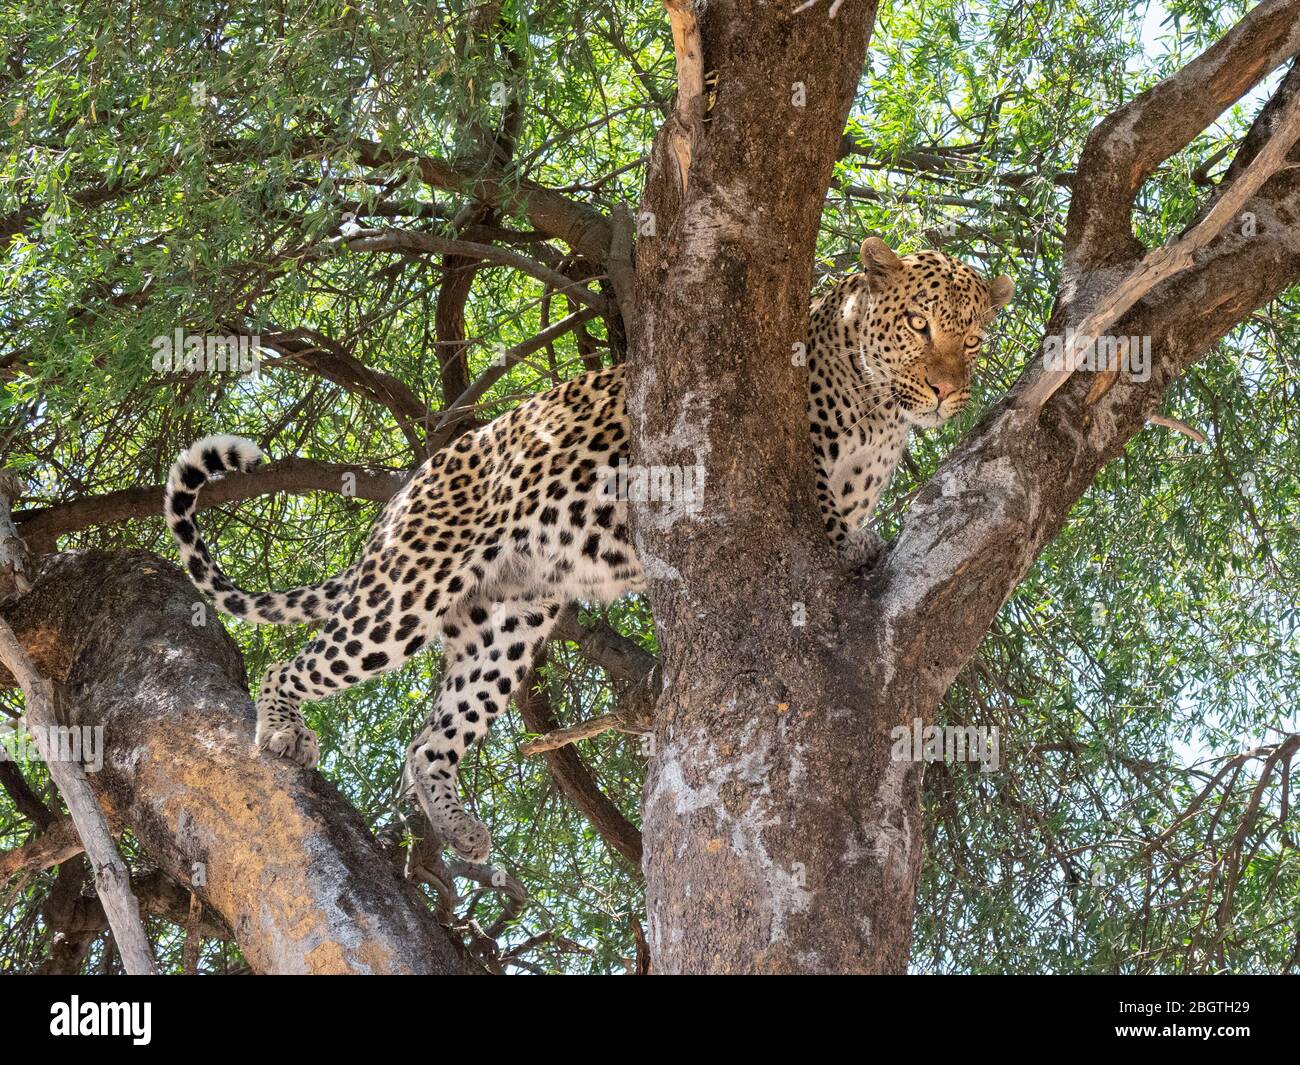 An adult leopard, Panthera pardus, done feeding on a warthog it dragged up in a tree in Chobe National Park, Botswana, South Africa. Stock Photo